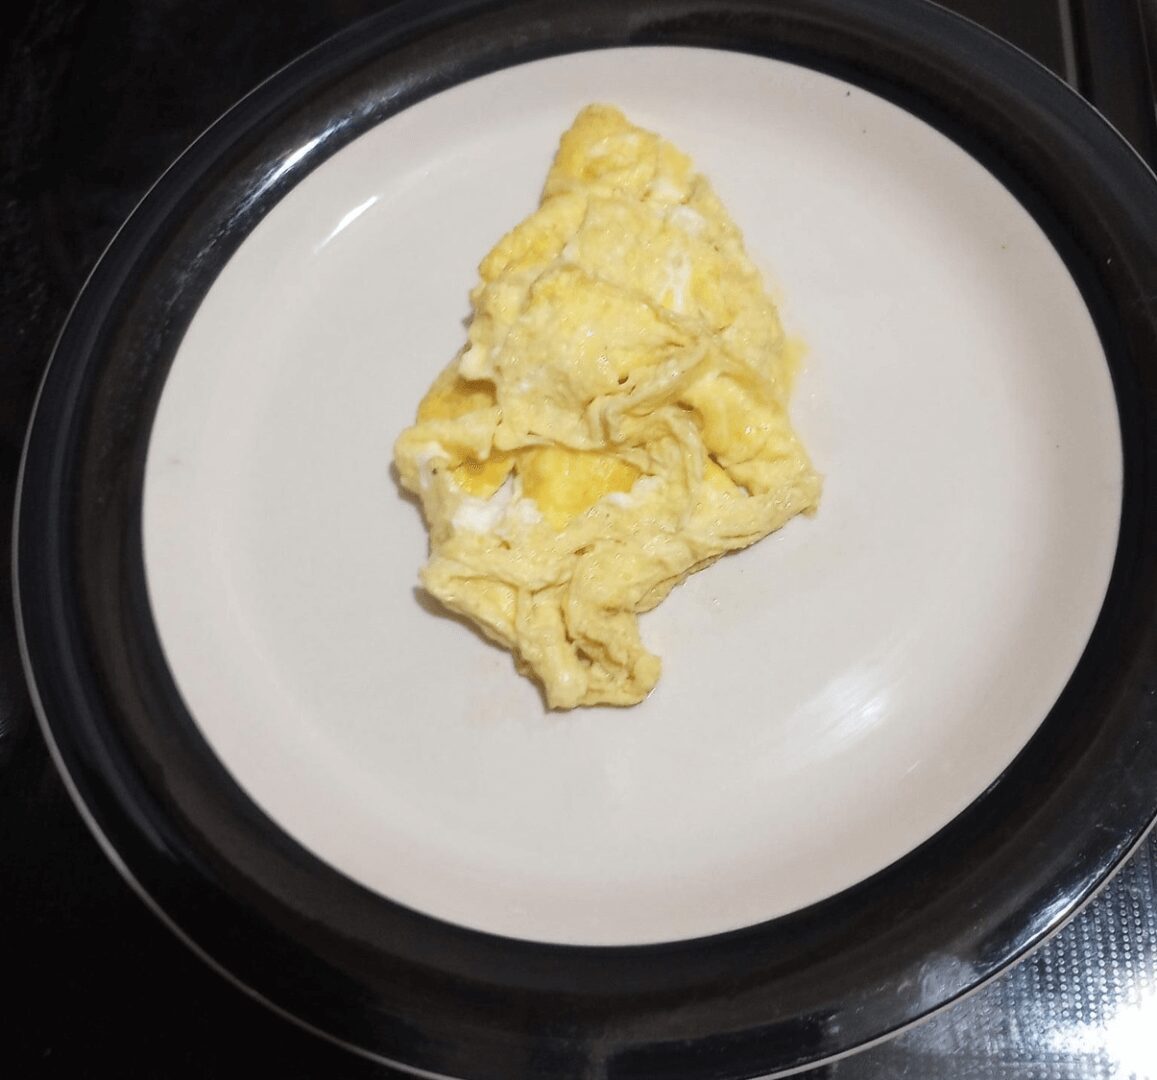 A plate of cooked omelet on the table